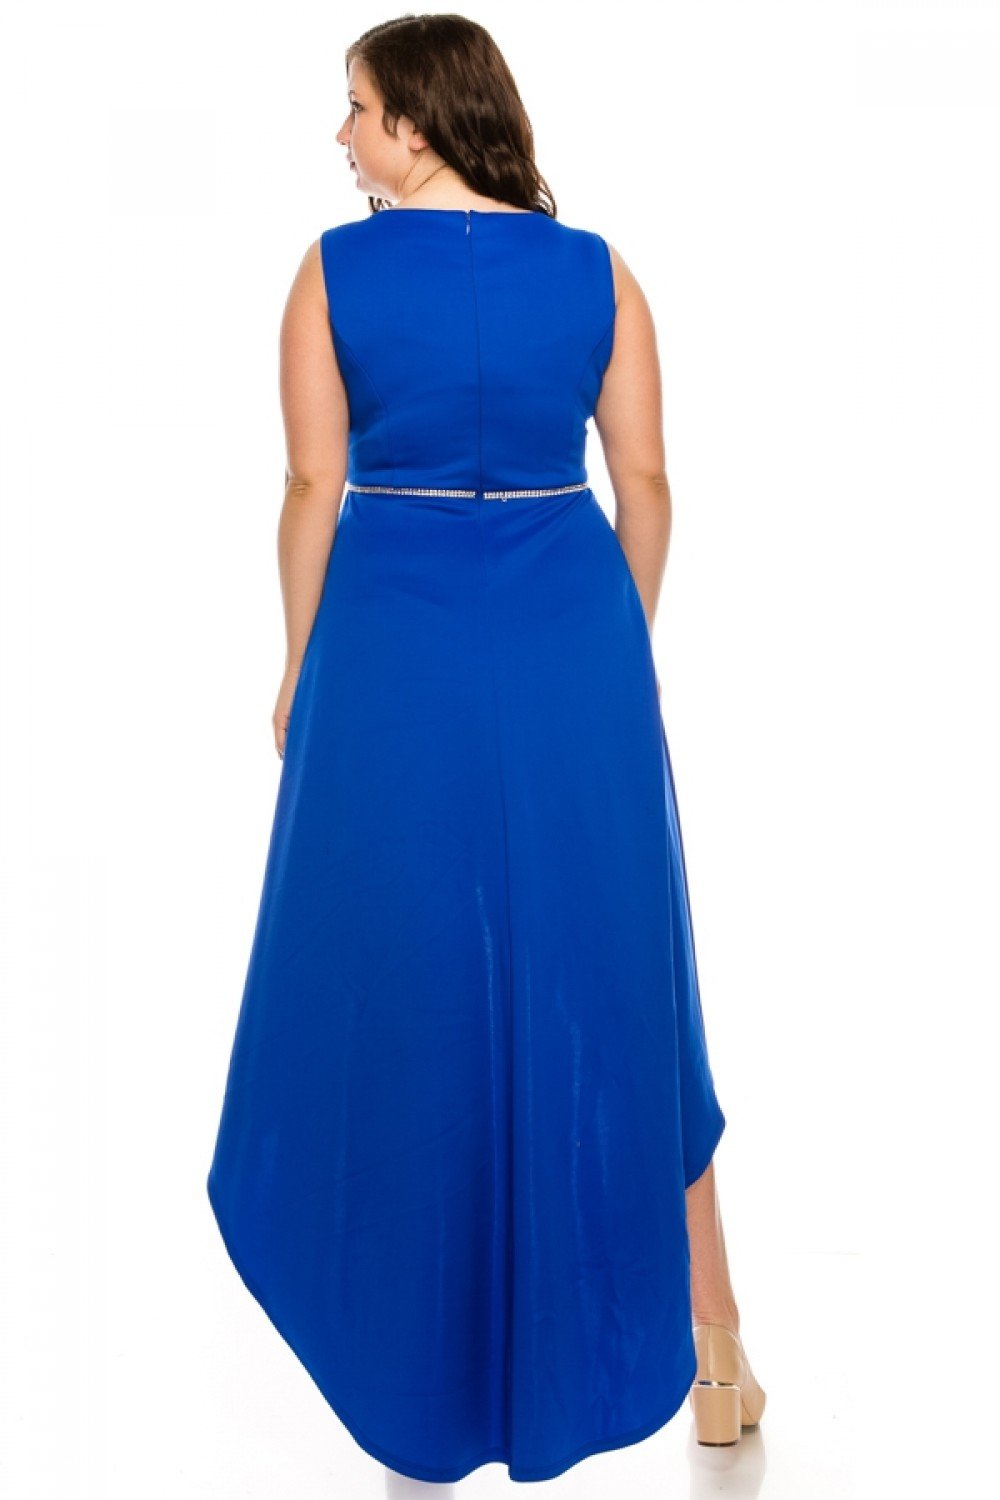 Shelby Nites - N281 Sleeveless Scoop Neck High Low Dress In Blue